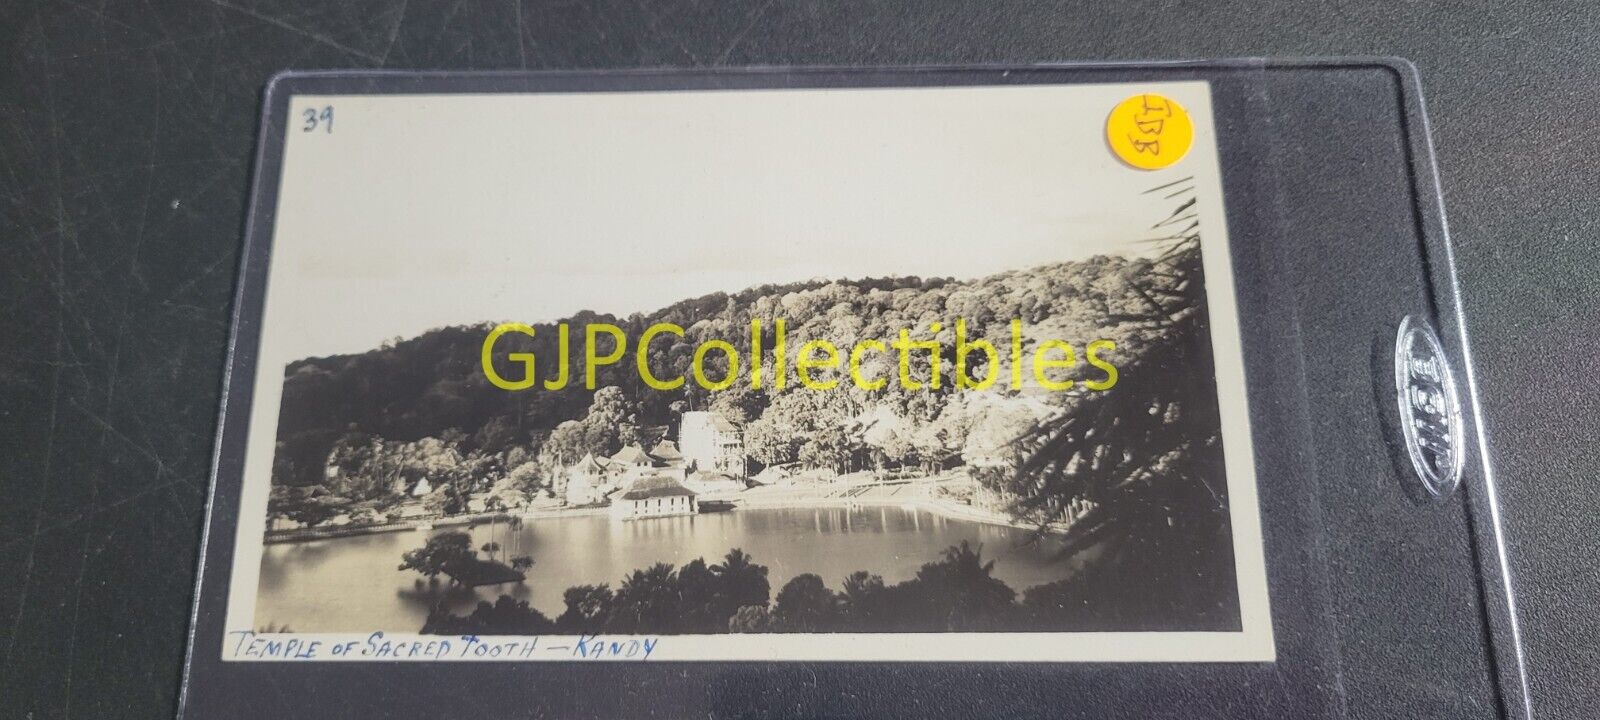 IBB VINTAGE PHOTOGRAPH Spencer Lionel Adams TEMPLE OF SACRED TOOTH KANDY